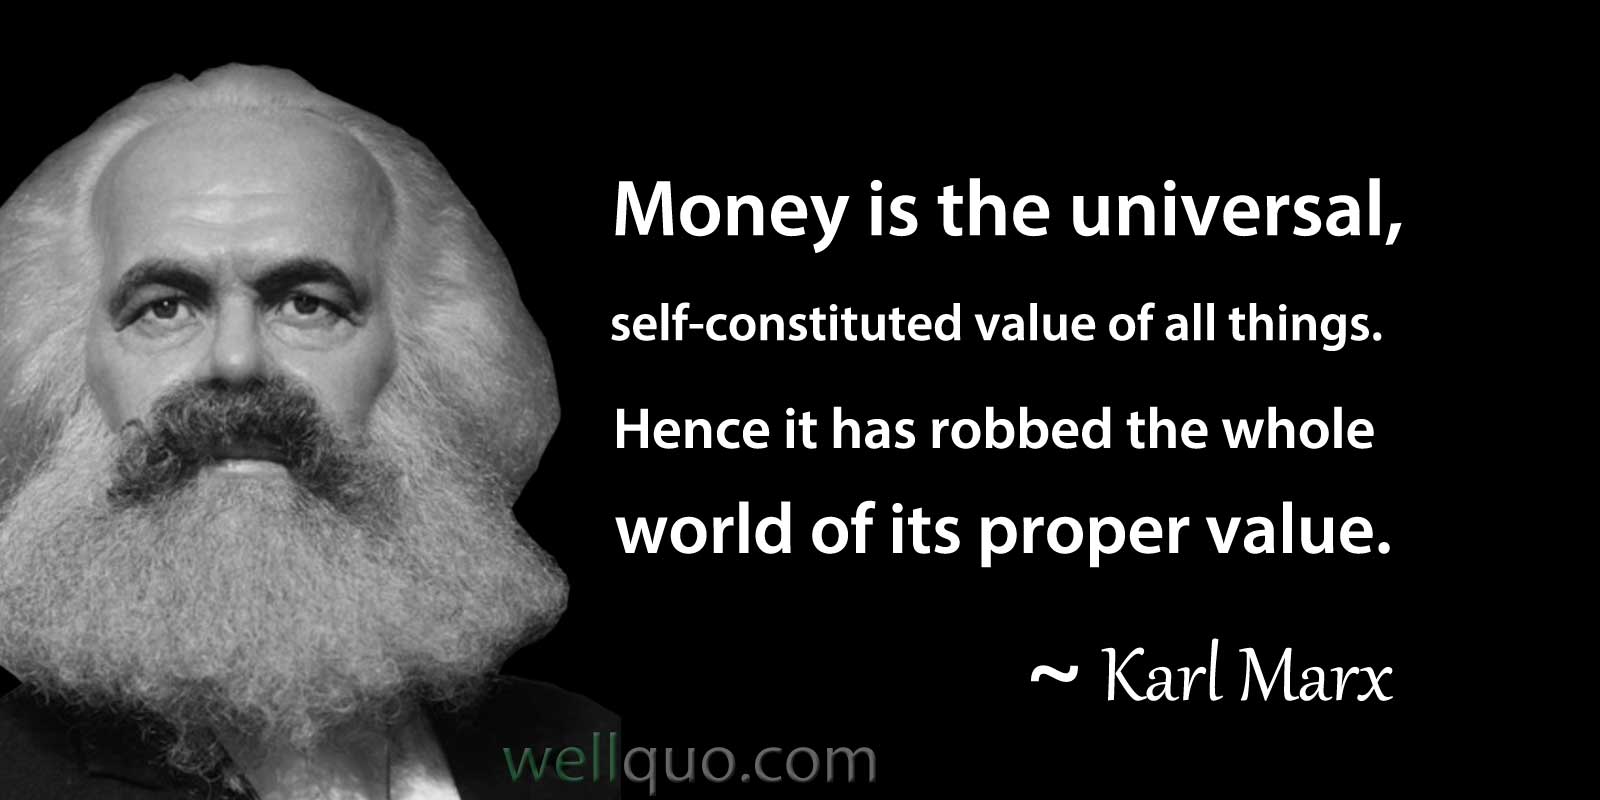 Karl Marx Quotes On Capitalism And Money Well Quo